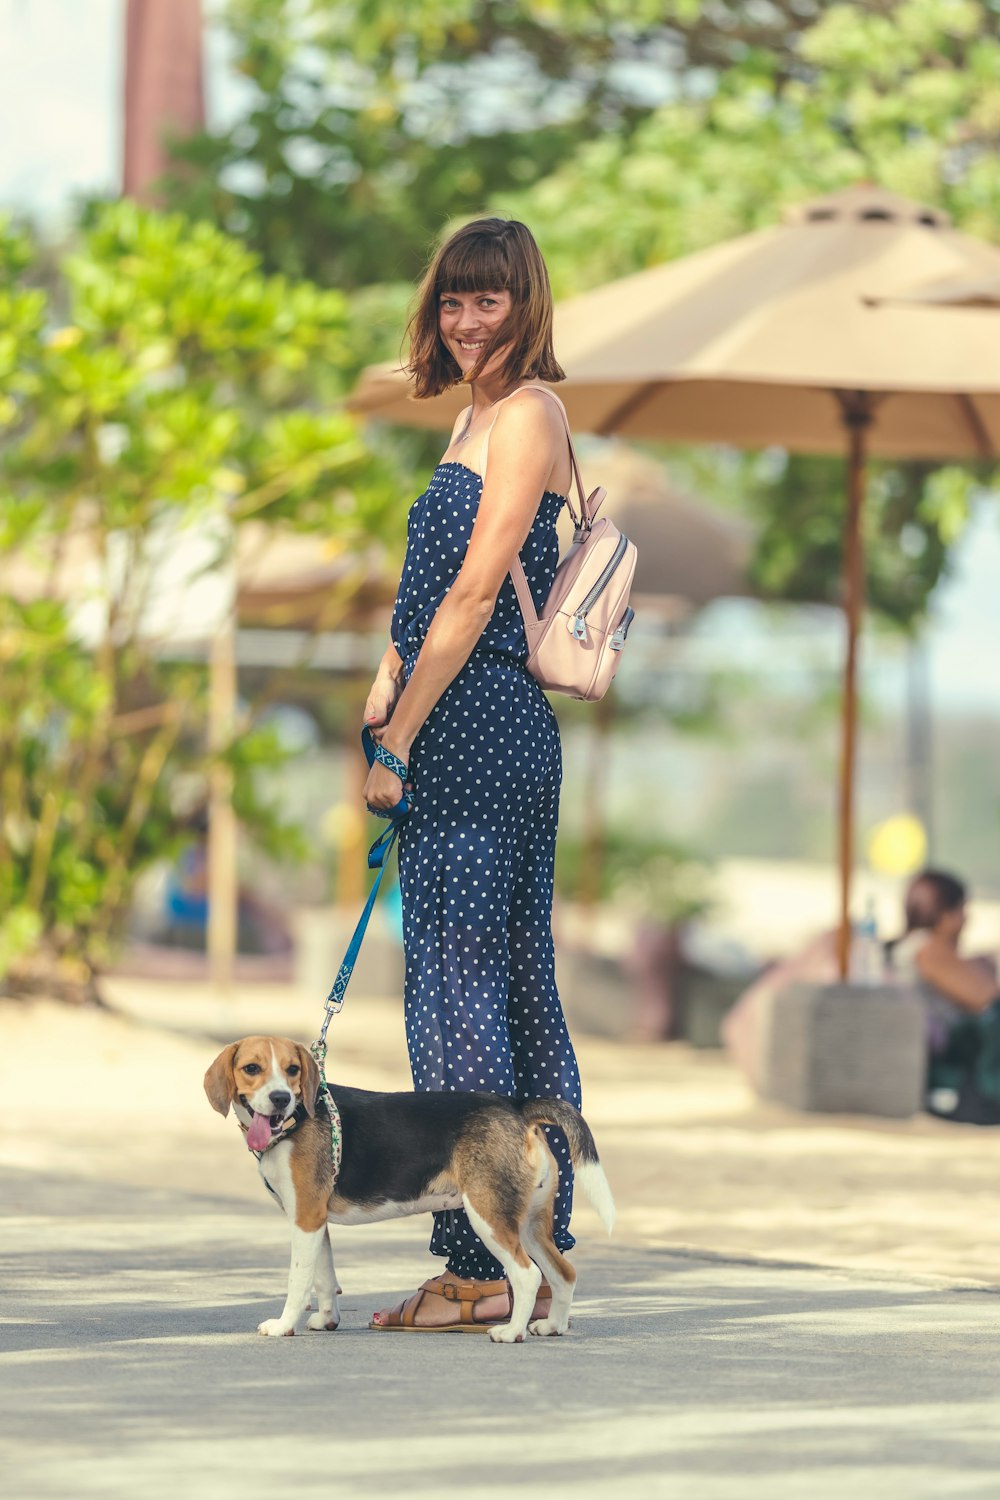 woman in black and white polka dot dress carrying brown and white short coated dog